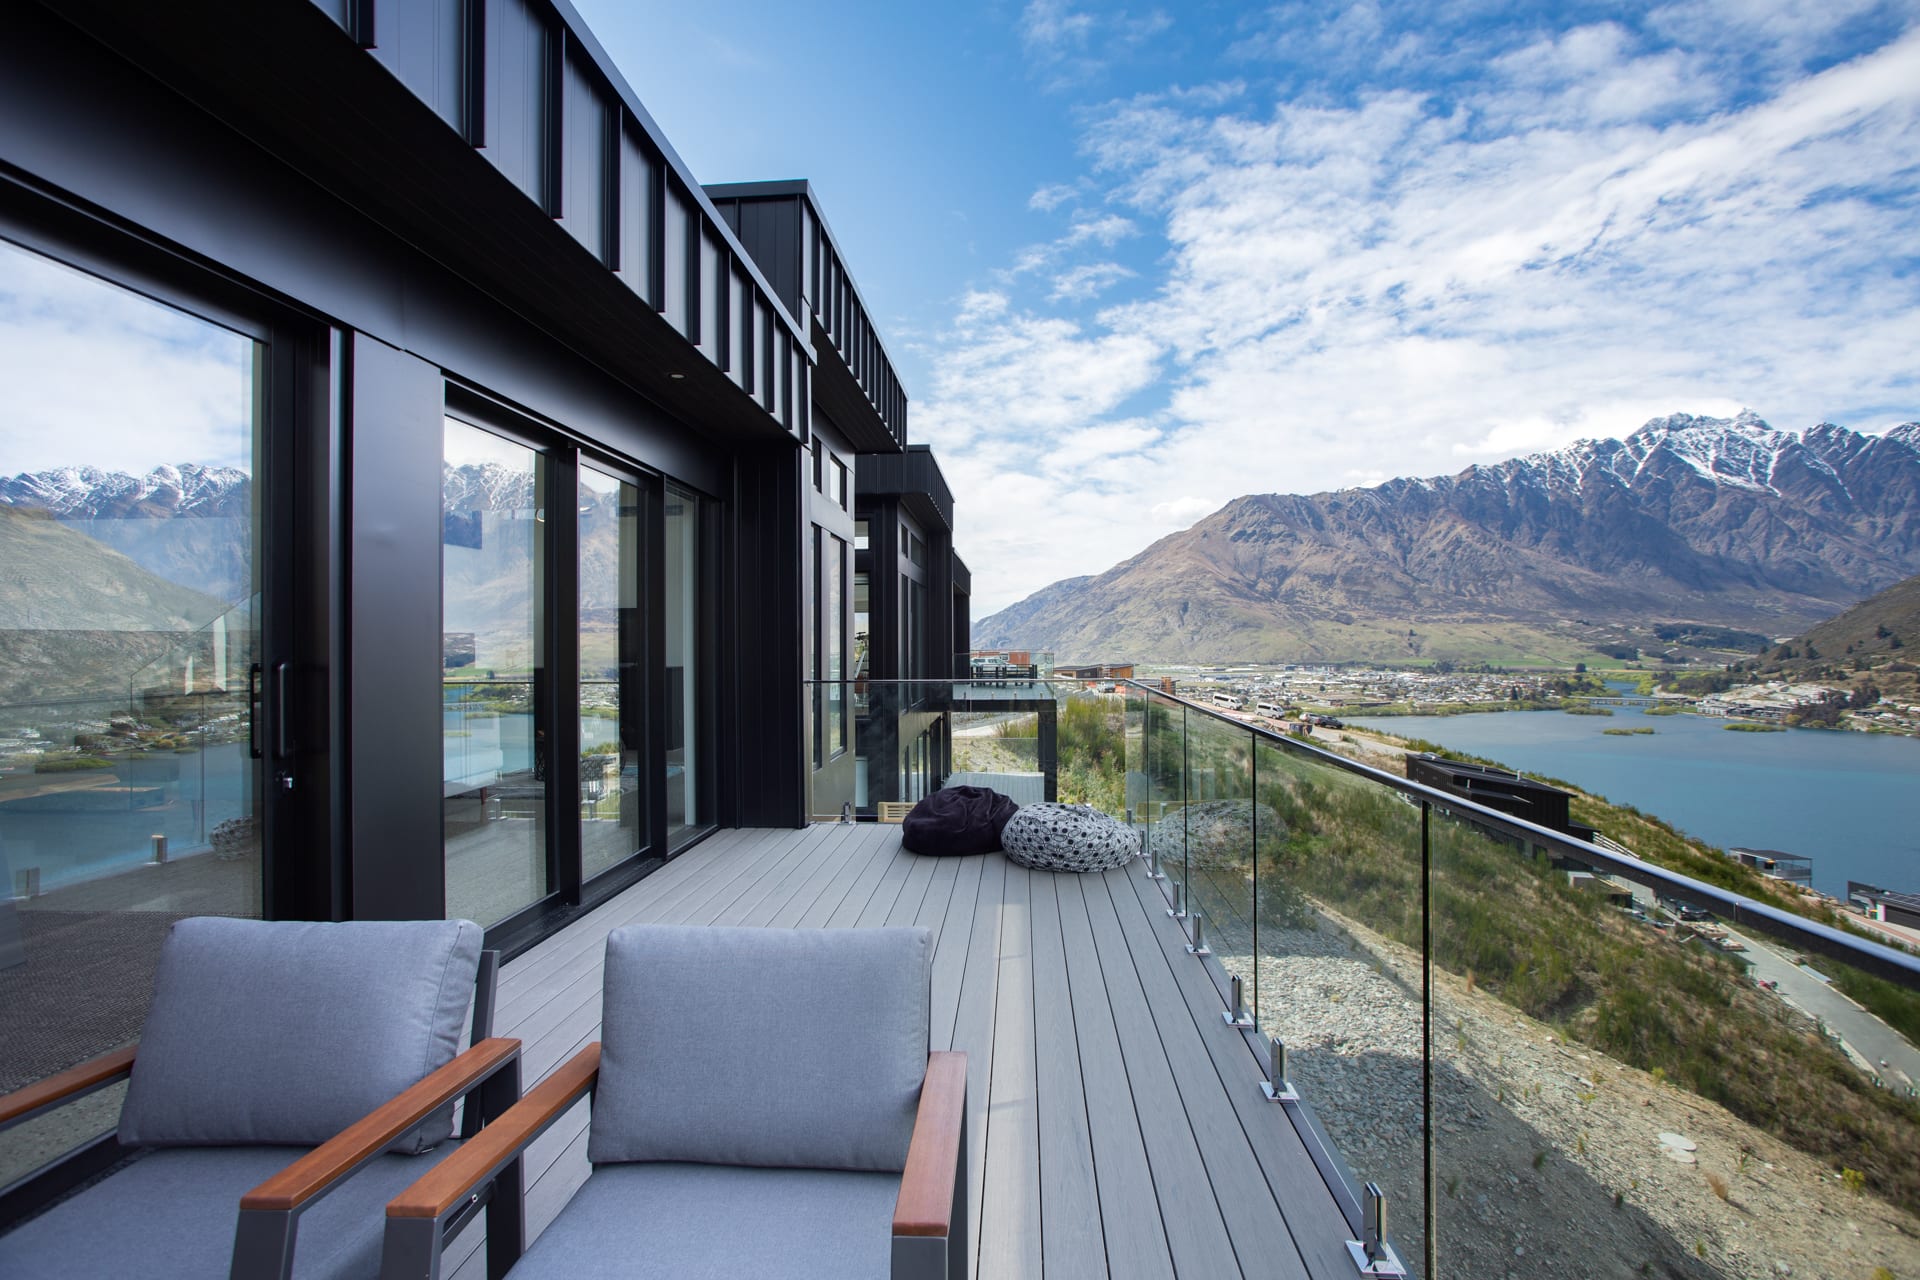 Admiring the views from your deck